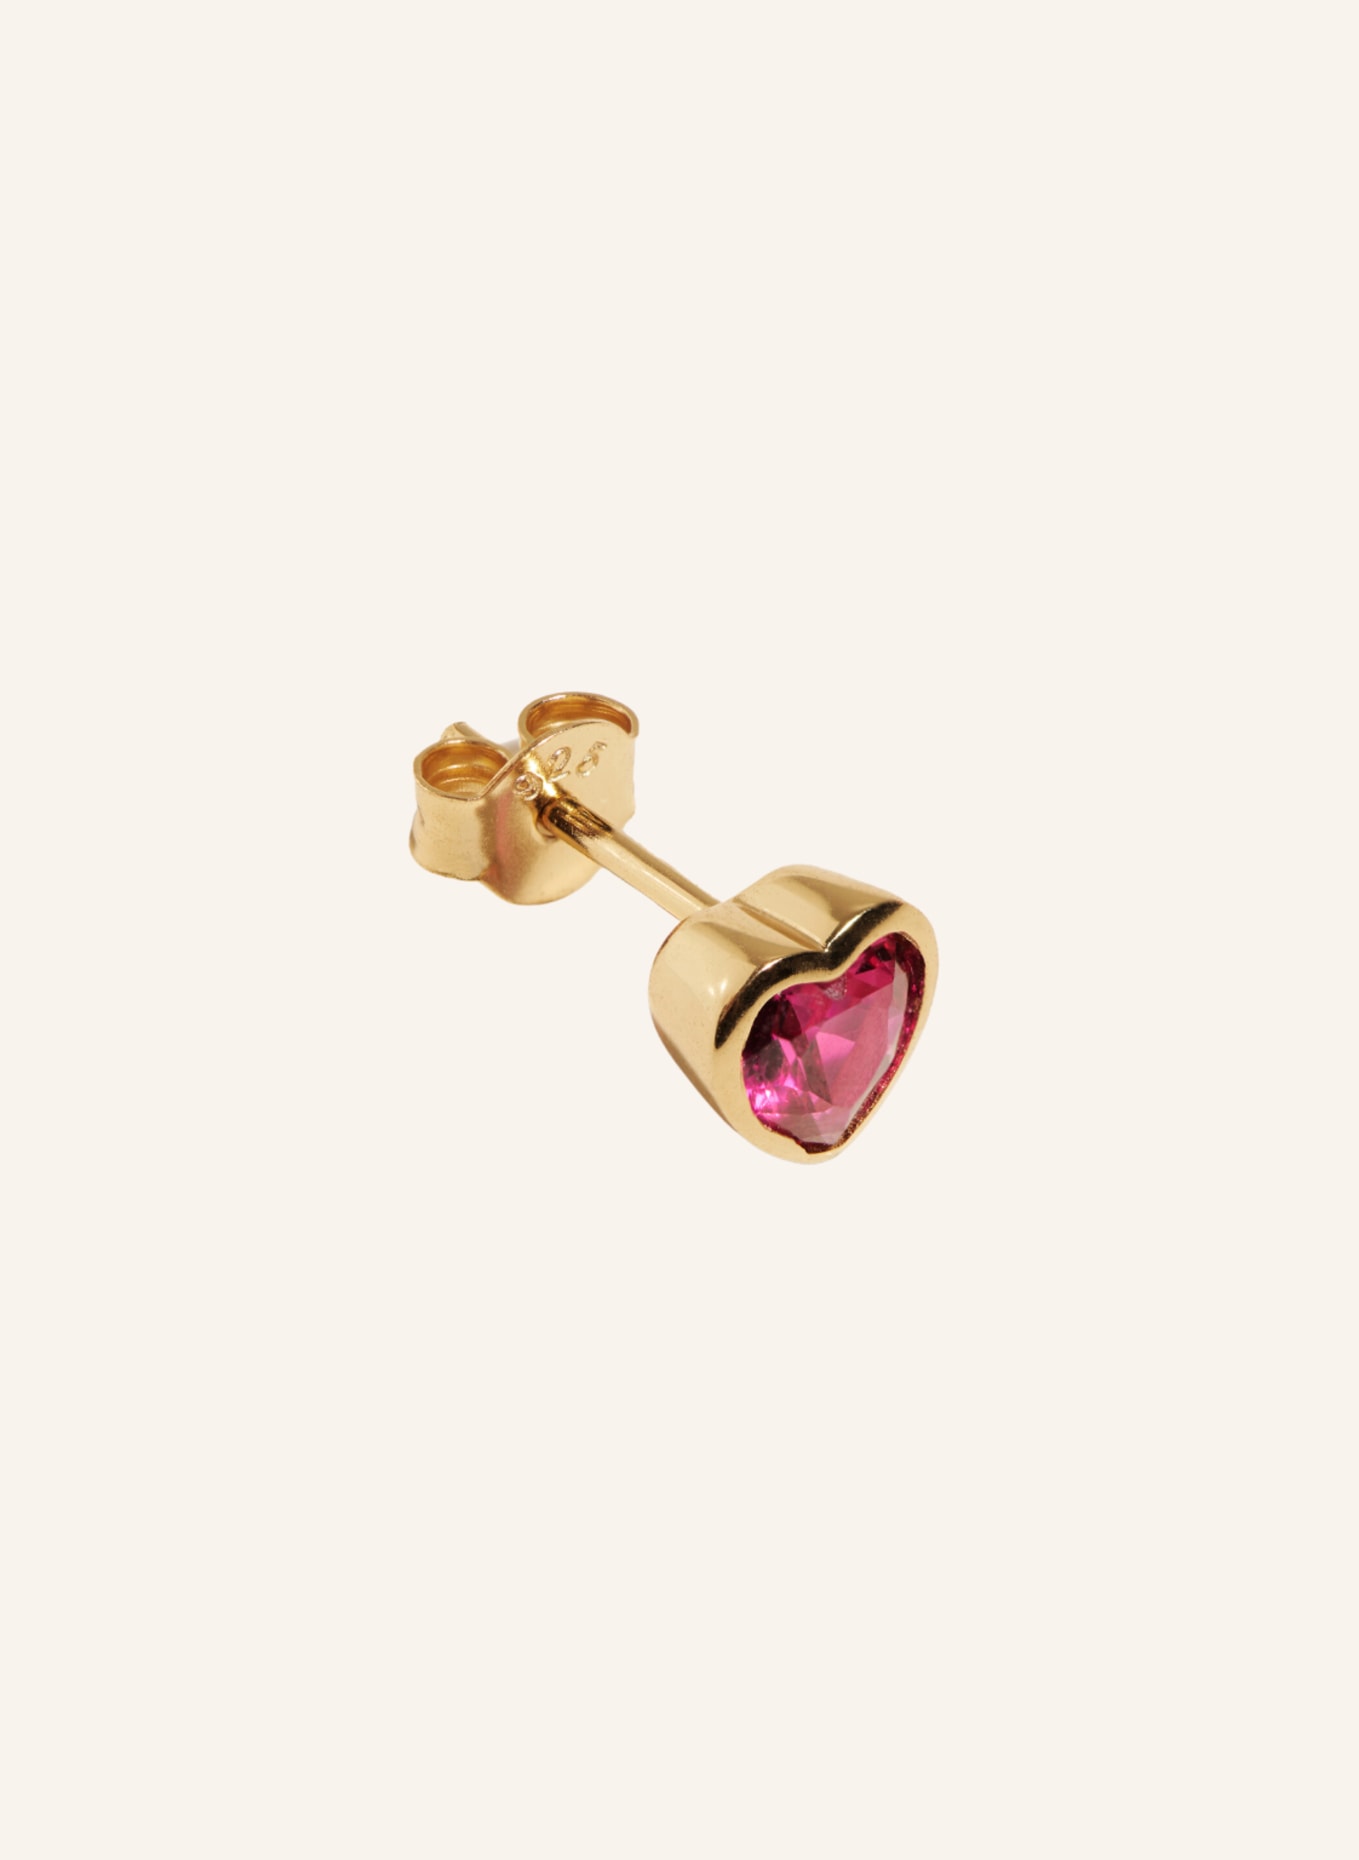 OHH LUILU Single Ohrring LOVE STUD RUBY PINK by GLAMBOU, Farbe: GOLD (Bild 1)